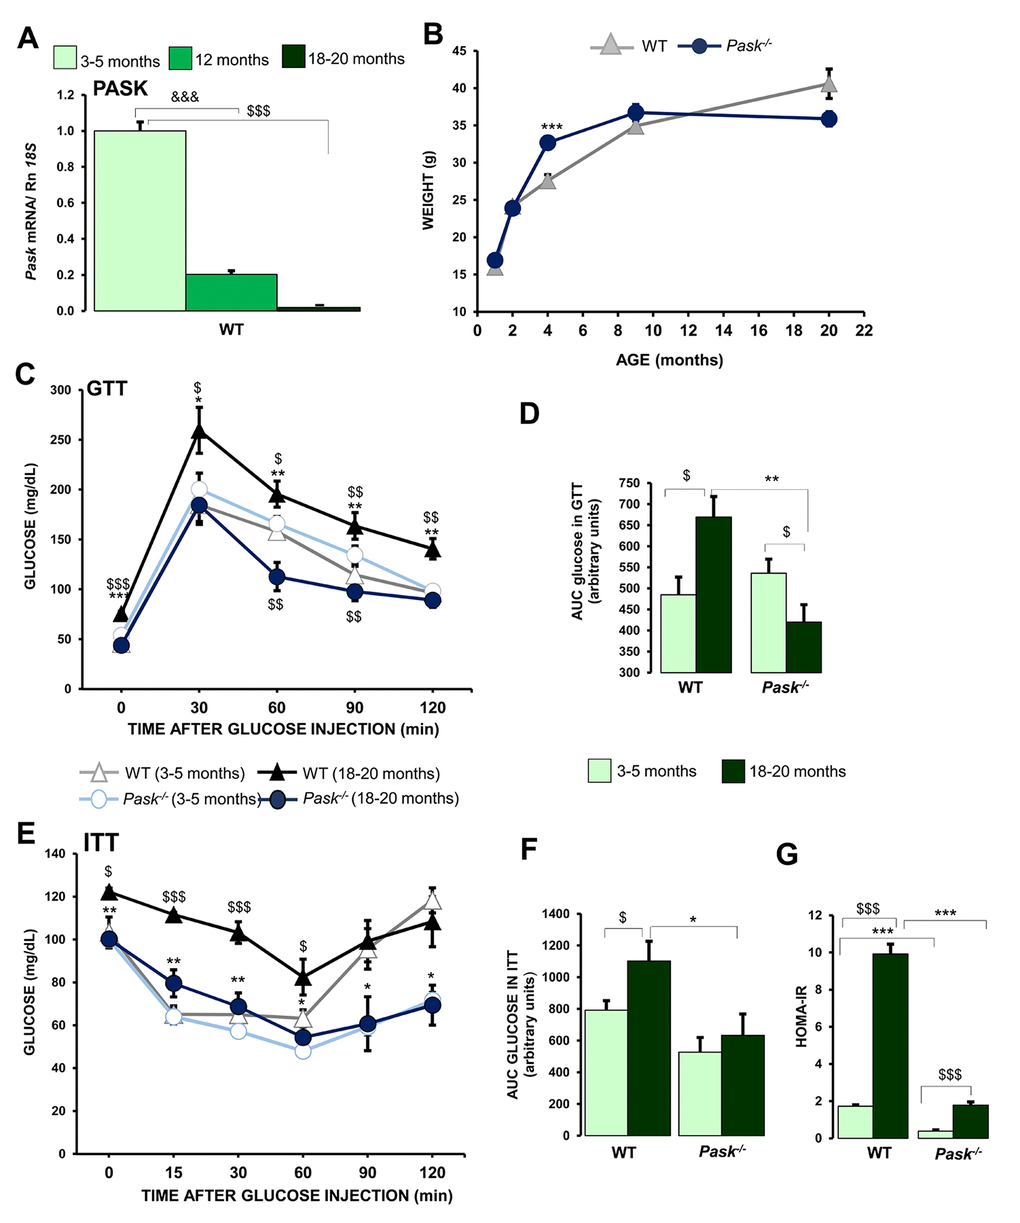 Effects of aging in the regulation of hepatic PASK expression, and parameters affected by aging: glucose tolerance, action of insulin and lipid-related parameters. Real-time PCR was used to analyze the expression of Pask (A) mRNA levels in livers from 3-5 months (young), 12-months, and 18-20 months (aged) wild-type (WT) mice. The value obtained for 3-5-month-old WT mice was taken as 1. &&&P vs. 12 months; $$$P vs. 18-20 months. (B) Comparison of growth curves of Δ WT and ● PASK-deficient mice, weight is means ± SEM. *** P Pask-/- (C–F) Glucose and insulin tolerance tests (GTT/ITT); serum glucose levels (mg/dL) were measured before and several times after an IP glucose (C, D) or insulin (E, F) injection in mice of Δ 3-5 months or ▲18-20 months WT and ○ 3-5 months or ● 18-20 months PASK-deficient mice (Pask-/-). Line graphs represent the means ± SEM; n = 8-11 animals per condition. $P $$P $$$P vs. 18-20 months; * P P P Pask-/-. Area under the curve for glucose (AUCglucose) (D) and insulin (AUCinsulin) (F). HOMA-IR values (G). (D, F, G) values are expressed as the means ± SEM in WT mice aged 3-5 months or 18-20 months and PASK-deficient mice (Pask-/-) aged 3-5 months or 18-20 months. $P $$$P vs. 18-20 months; * P P , *** P Pask-/-.